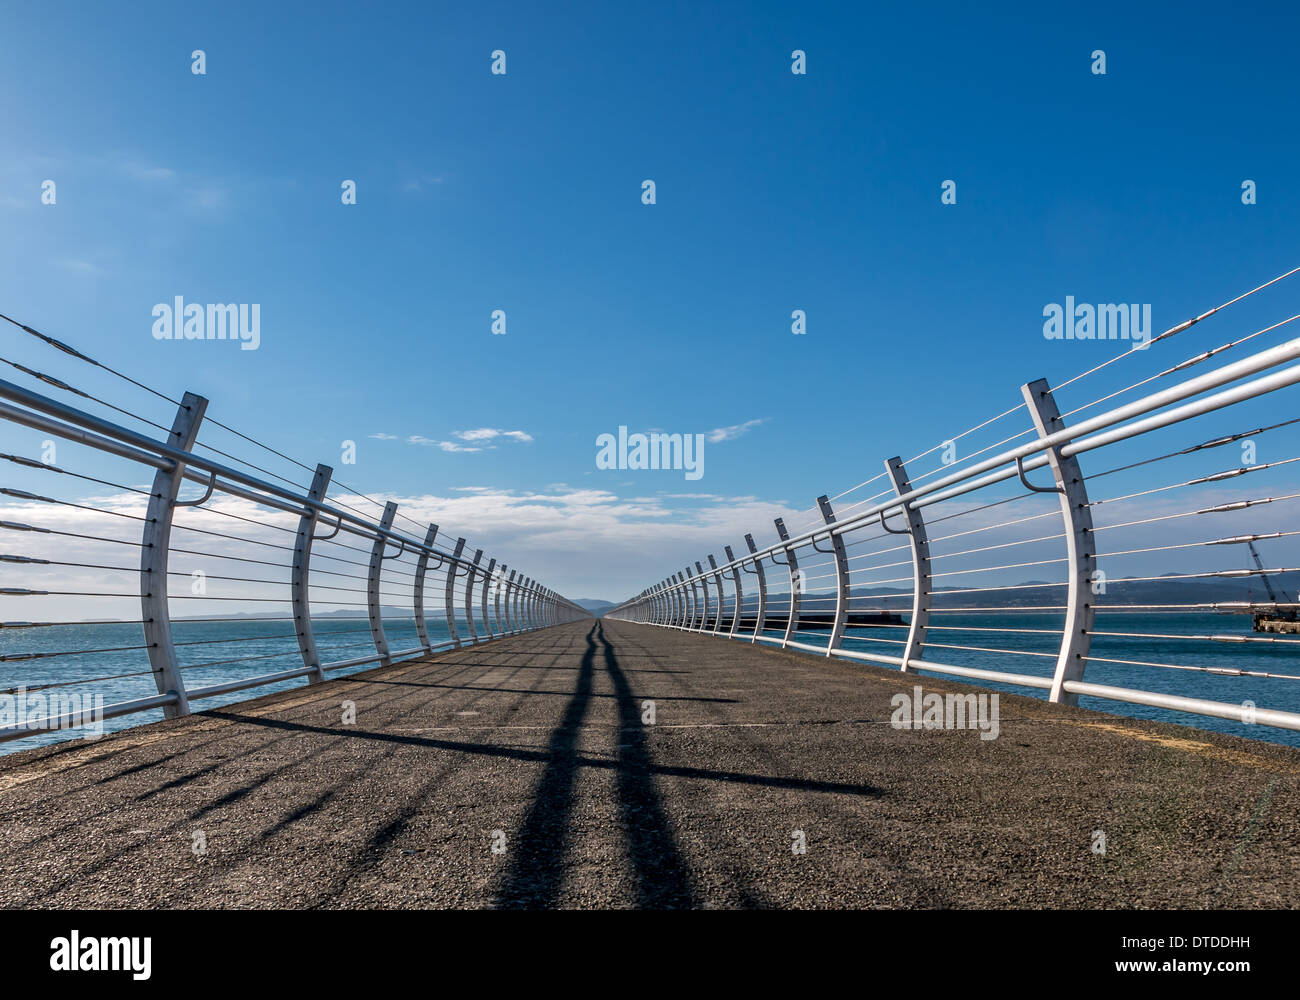 Handrails and shadows on a breakwater recede into the distance. Stock Photo